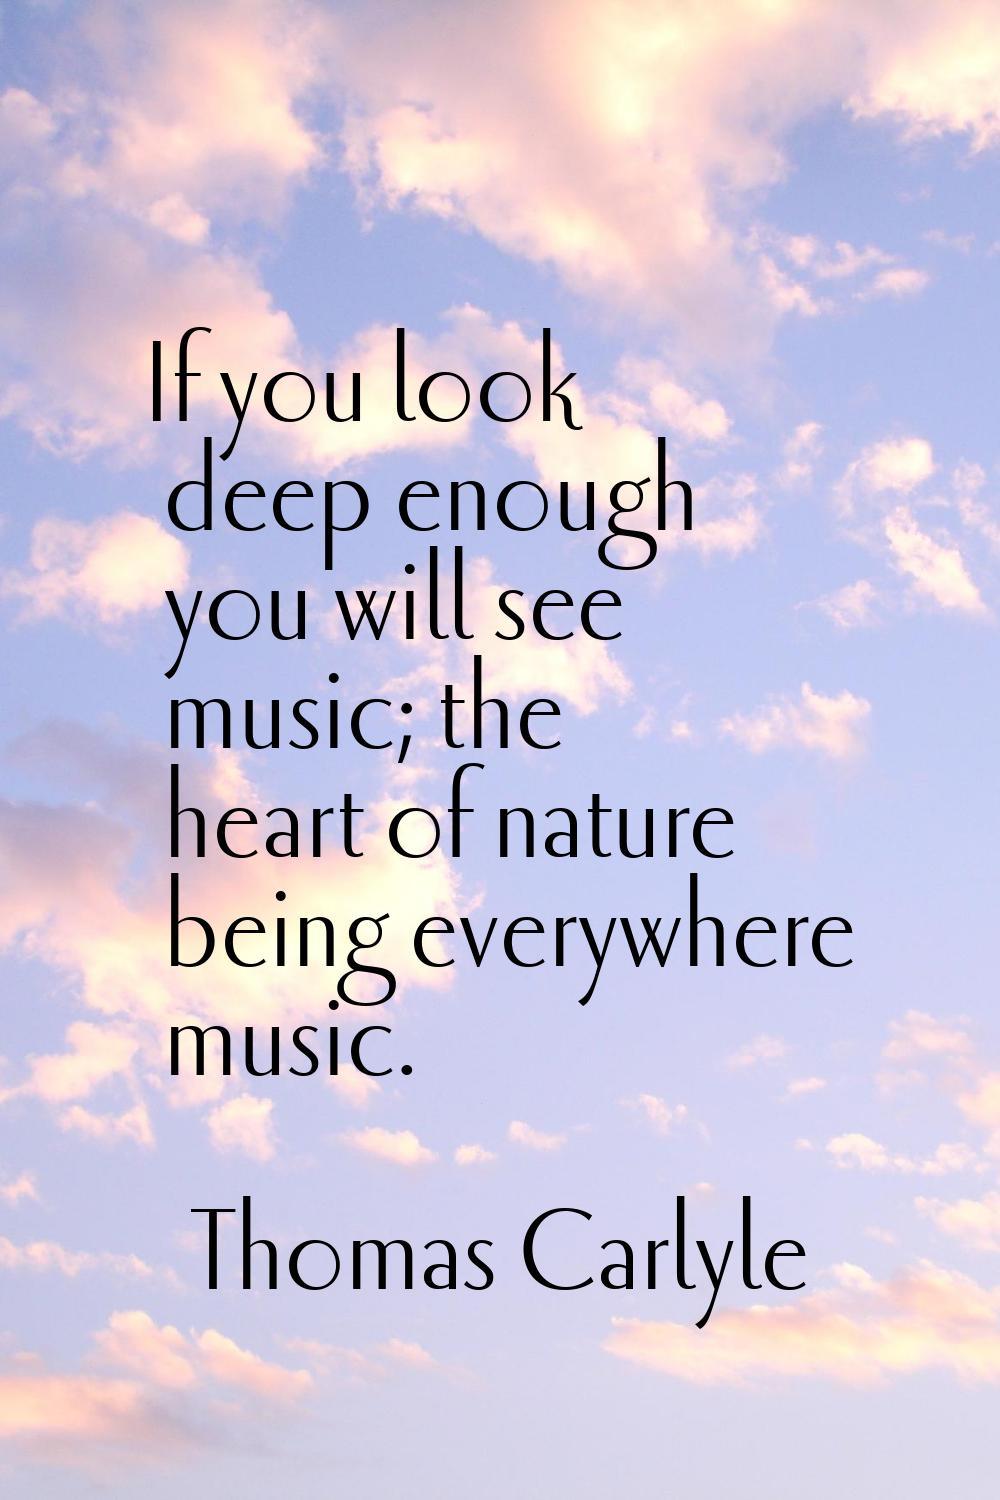 If you look deep enough you will see music; the heart of nature being everywhere music.